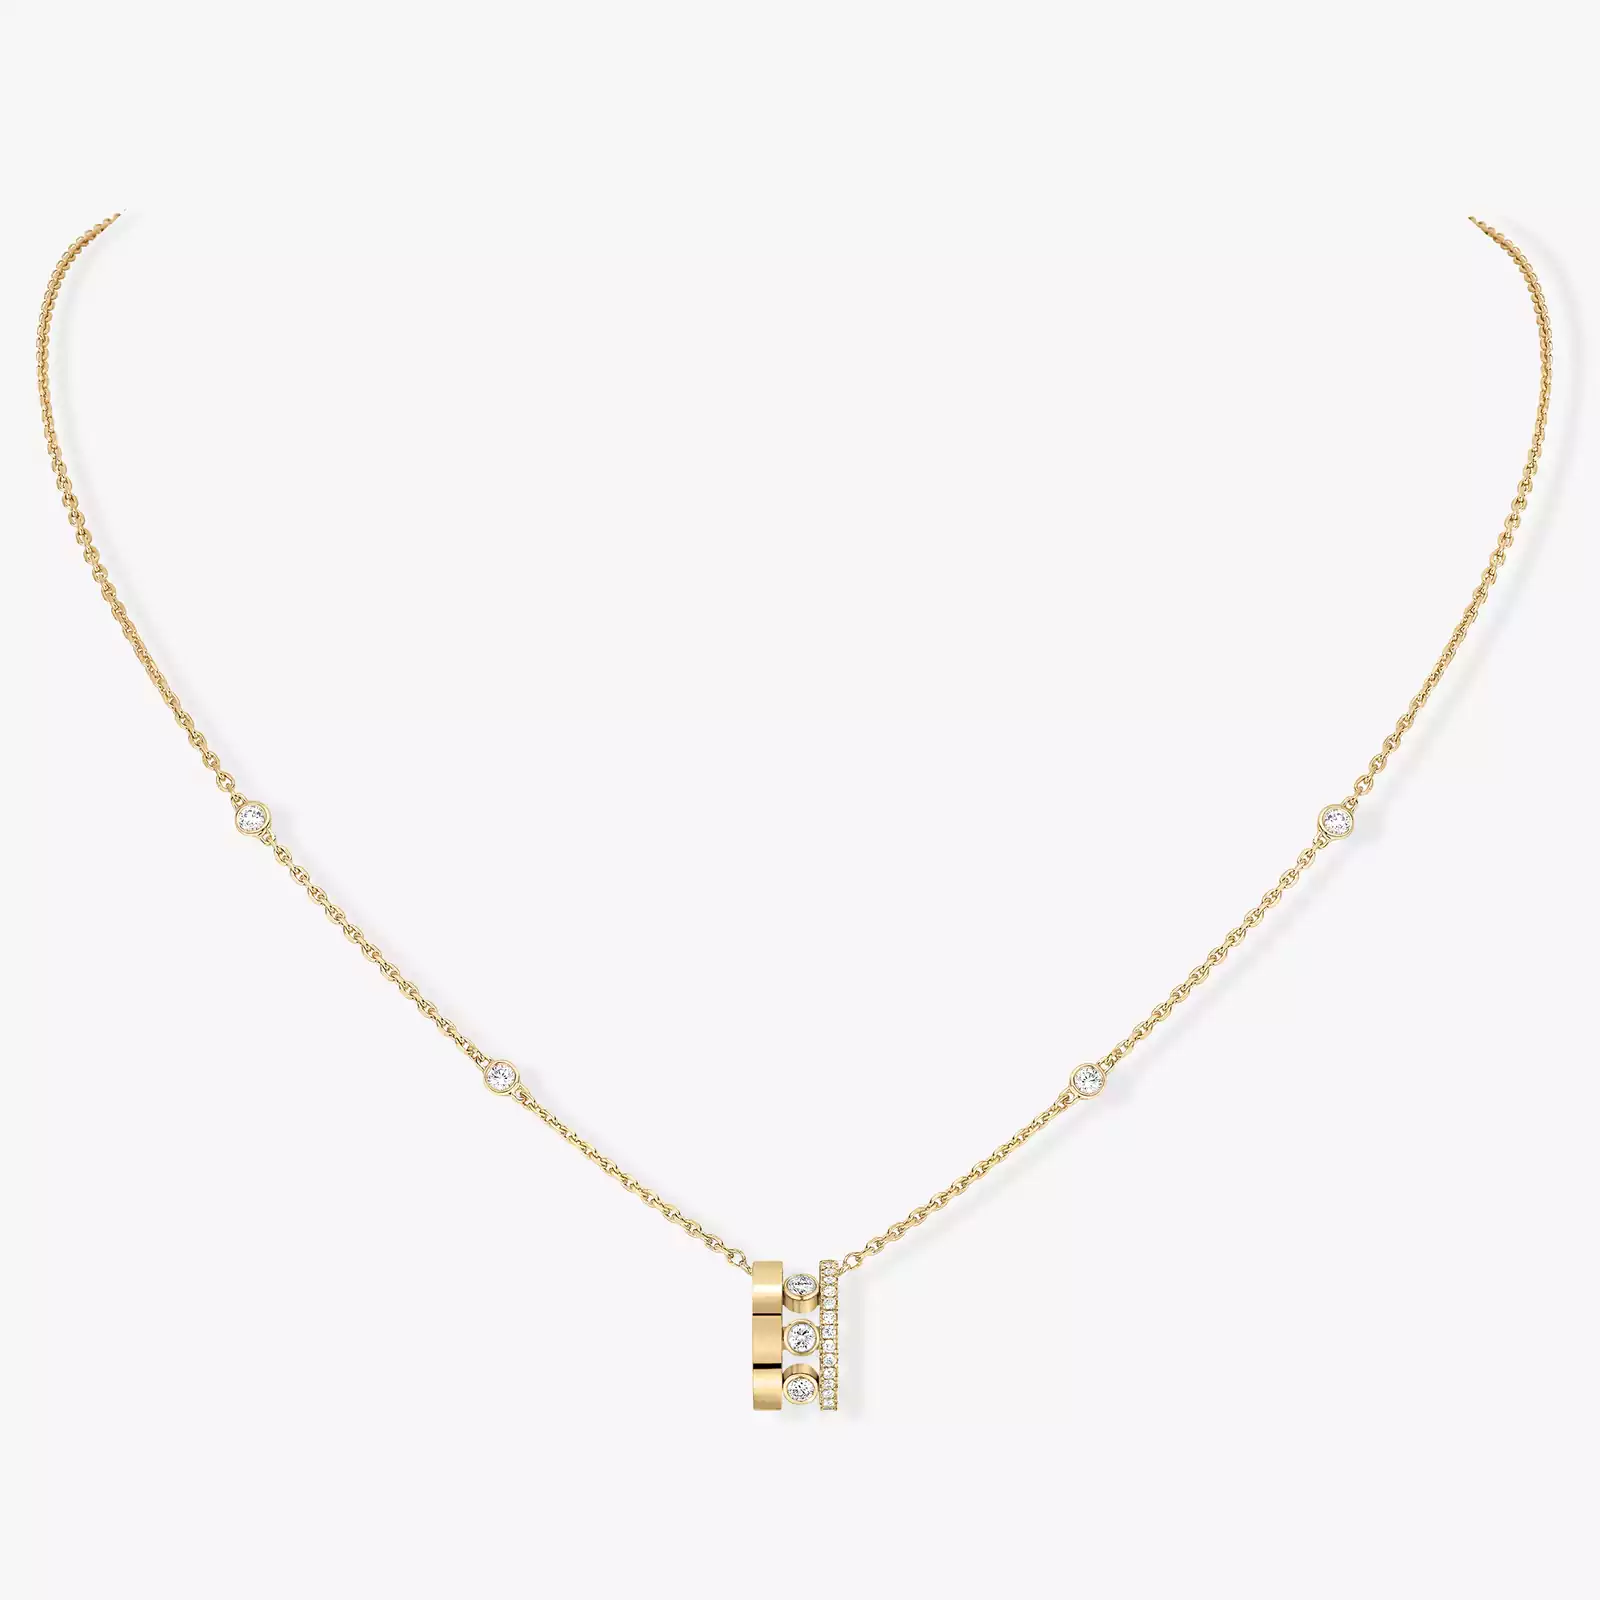 Move Romane Pendant  Yellow Gold For Her Diamond Necklace 07158-YG